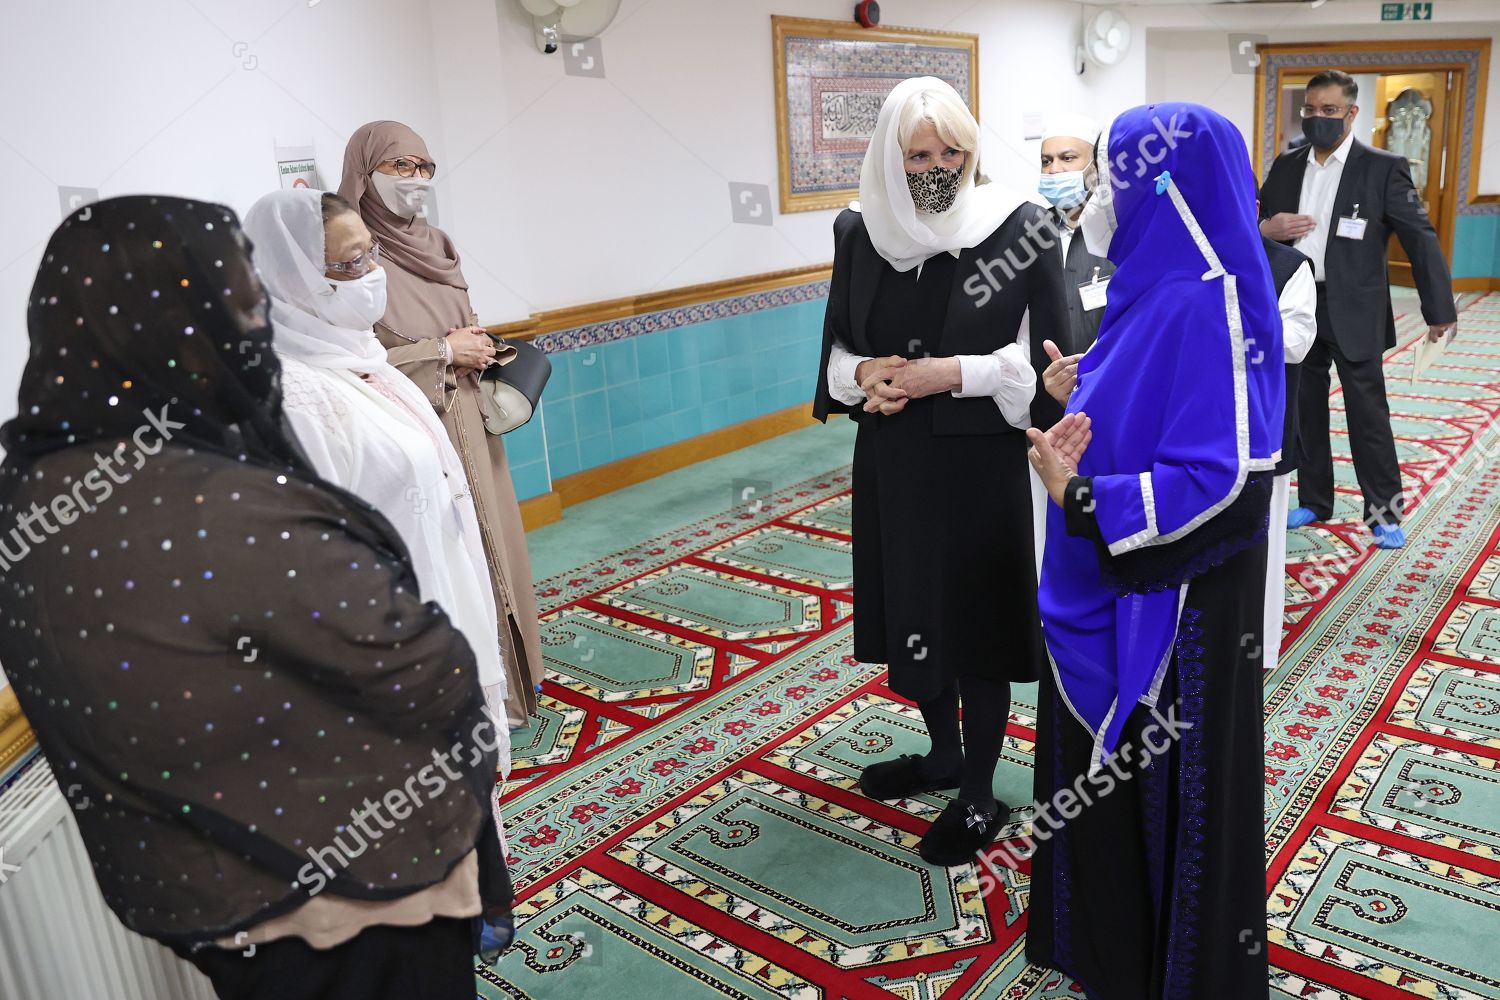 CASA REAL BRITÁNICA - Página 52 Camilla-duchess-of-cornwall-visit-to-wightman-road-mosque-london-uk-shutterstock-editorial-11847770l